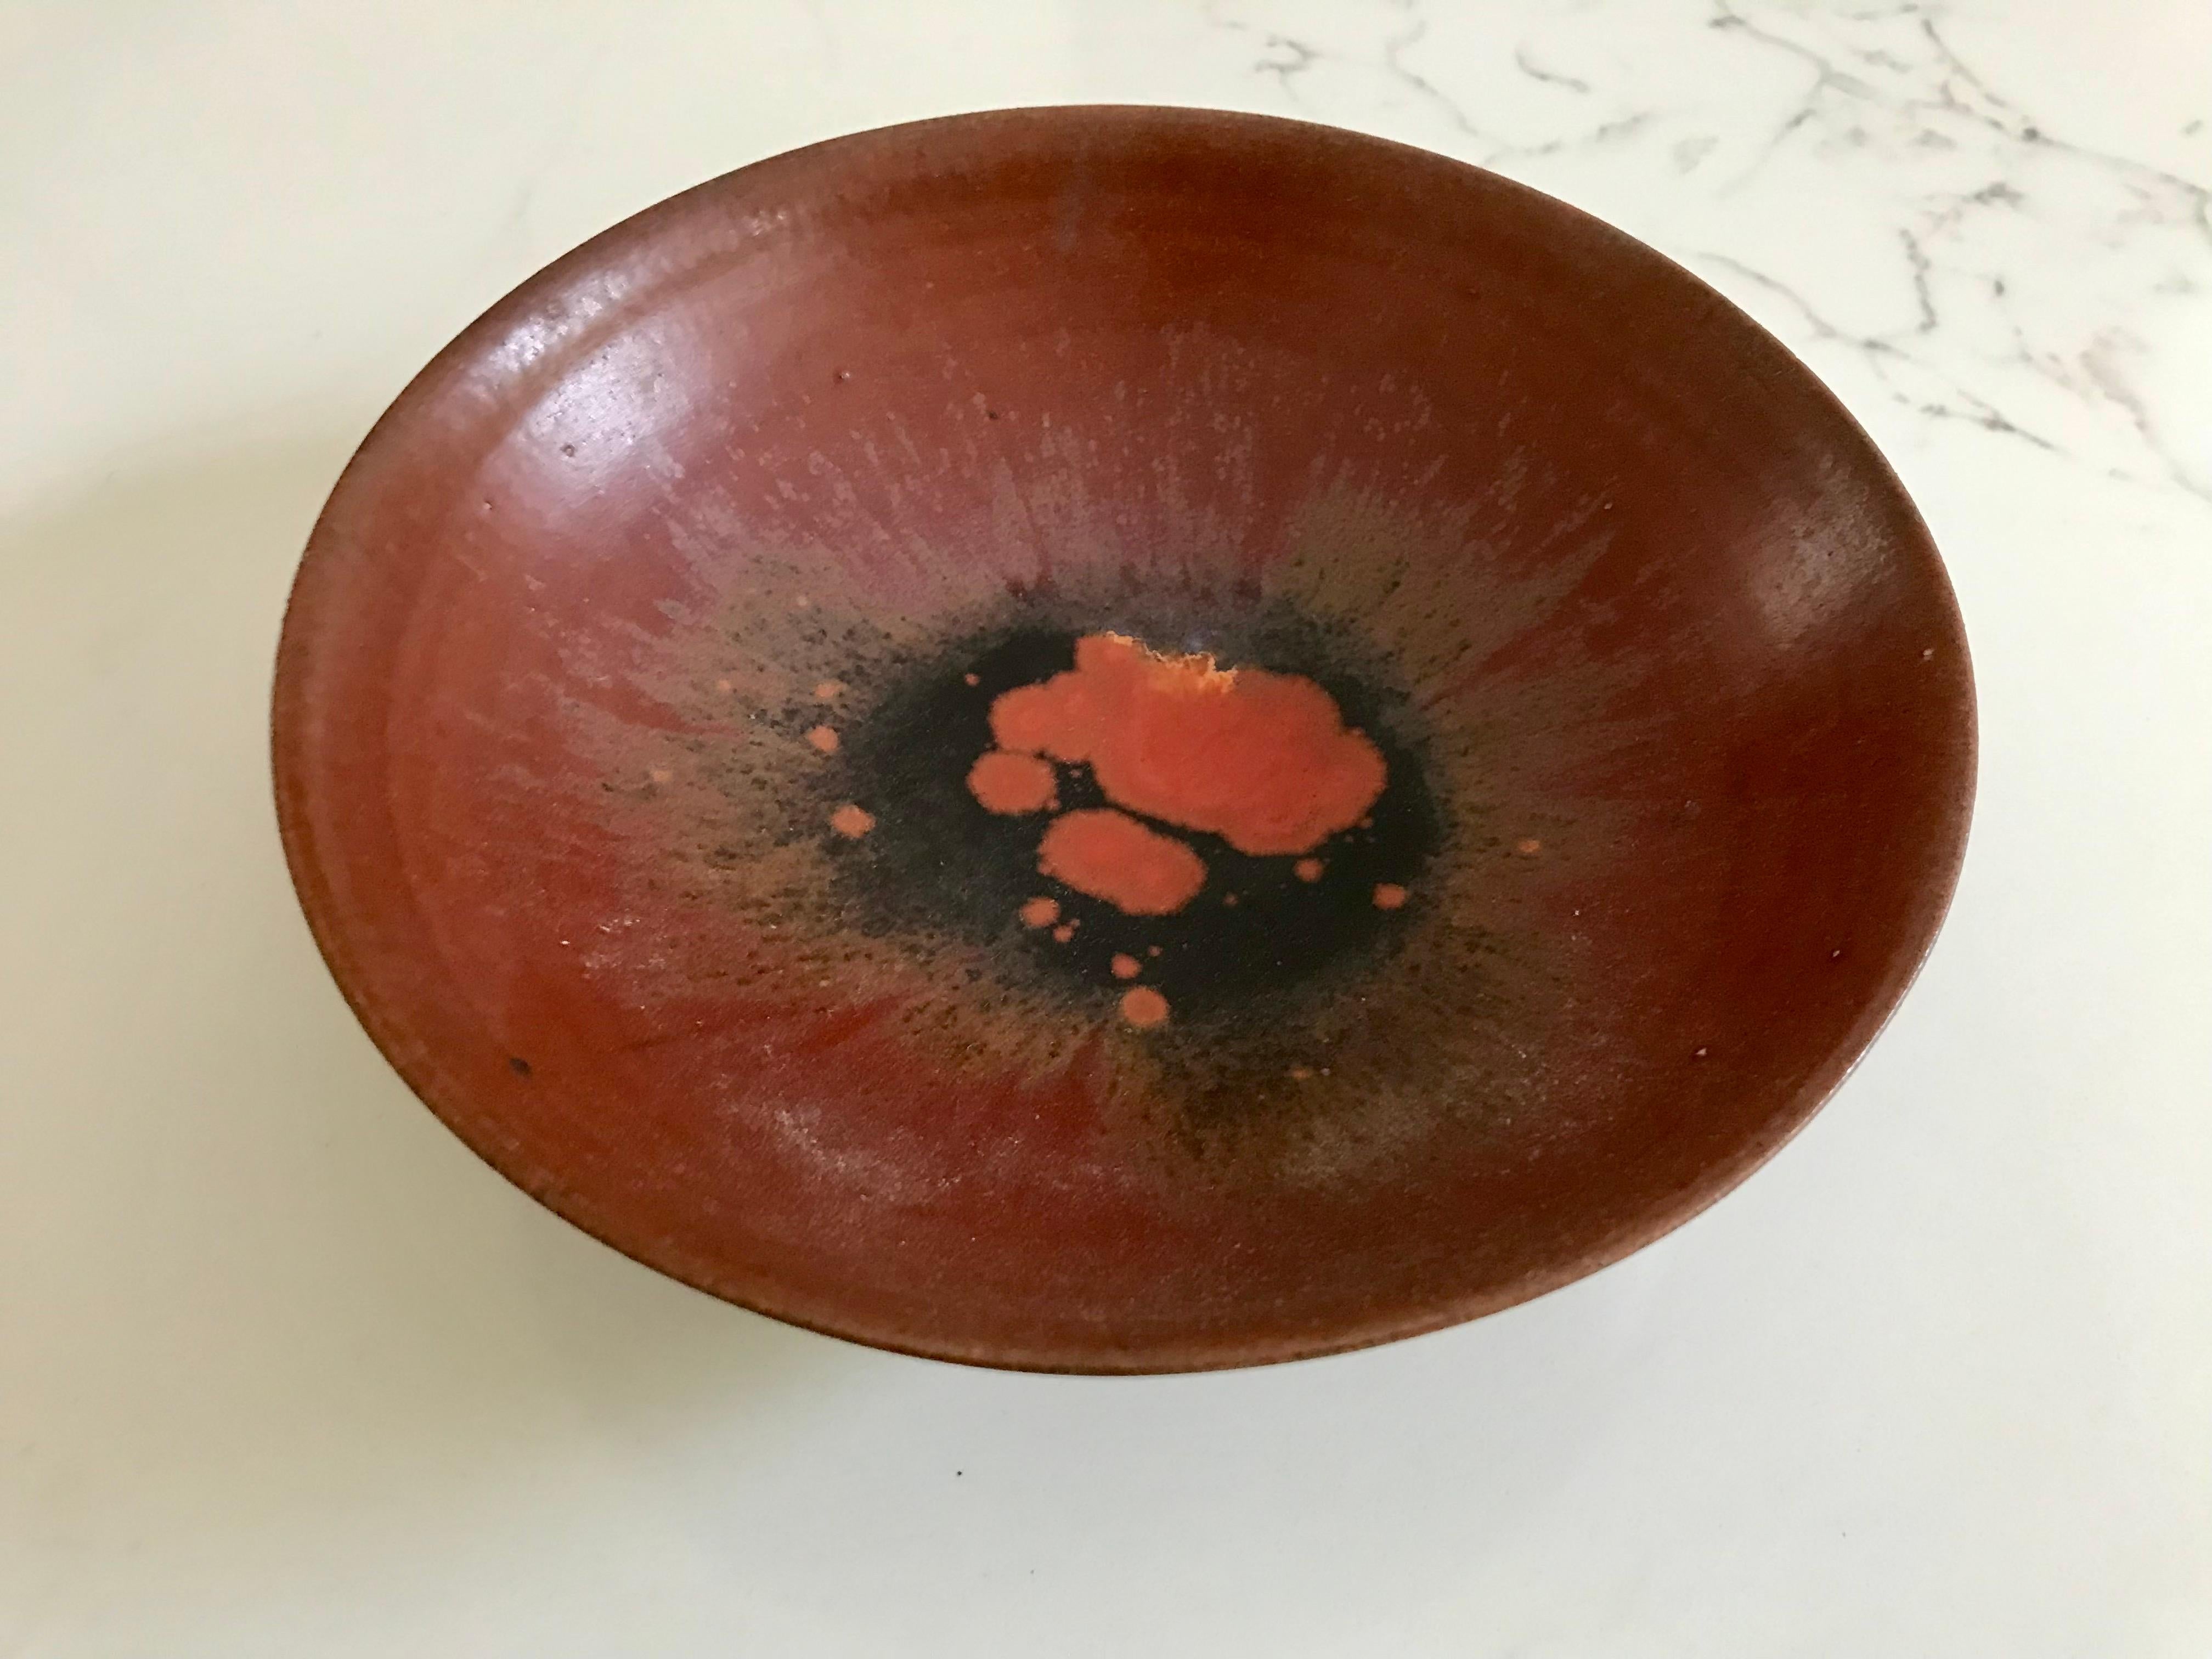 A great piece of California modern design.
By the husband + wife duo G + O Natzler. 
She threw the pottery on a wheel and he mixed the amazing glazes.
Rare footed bowl.
Thin walled clay.
Beautiful oxblood color with other hues that bleed